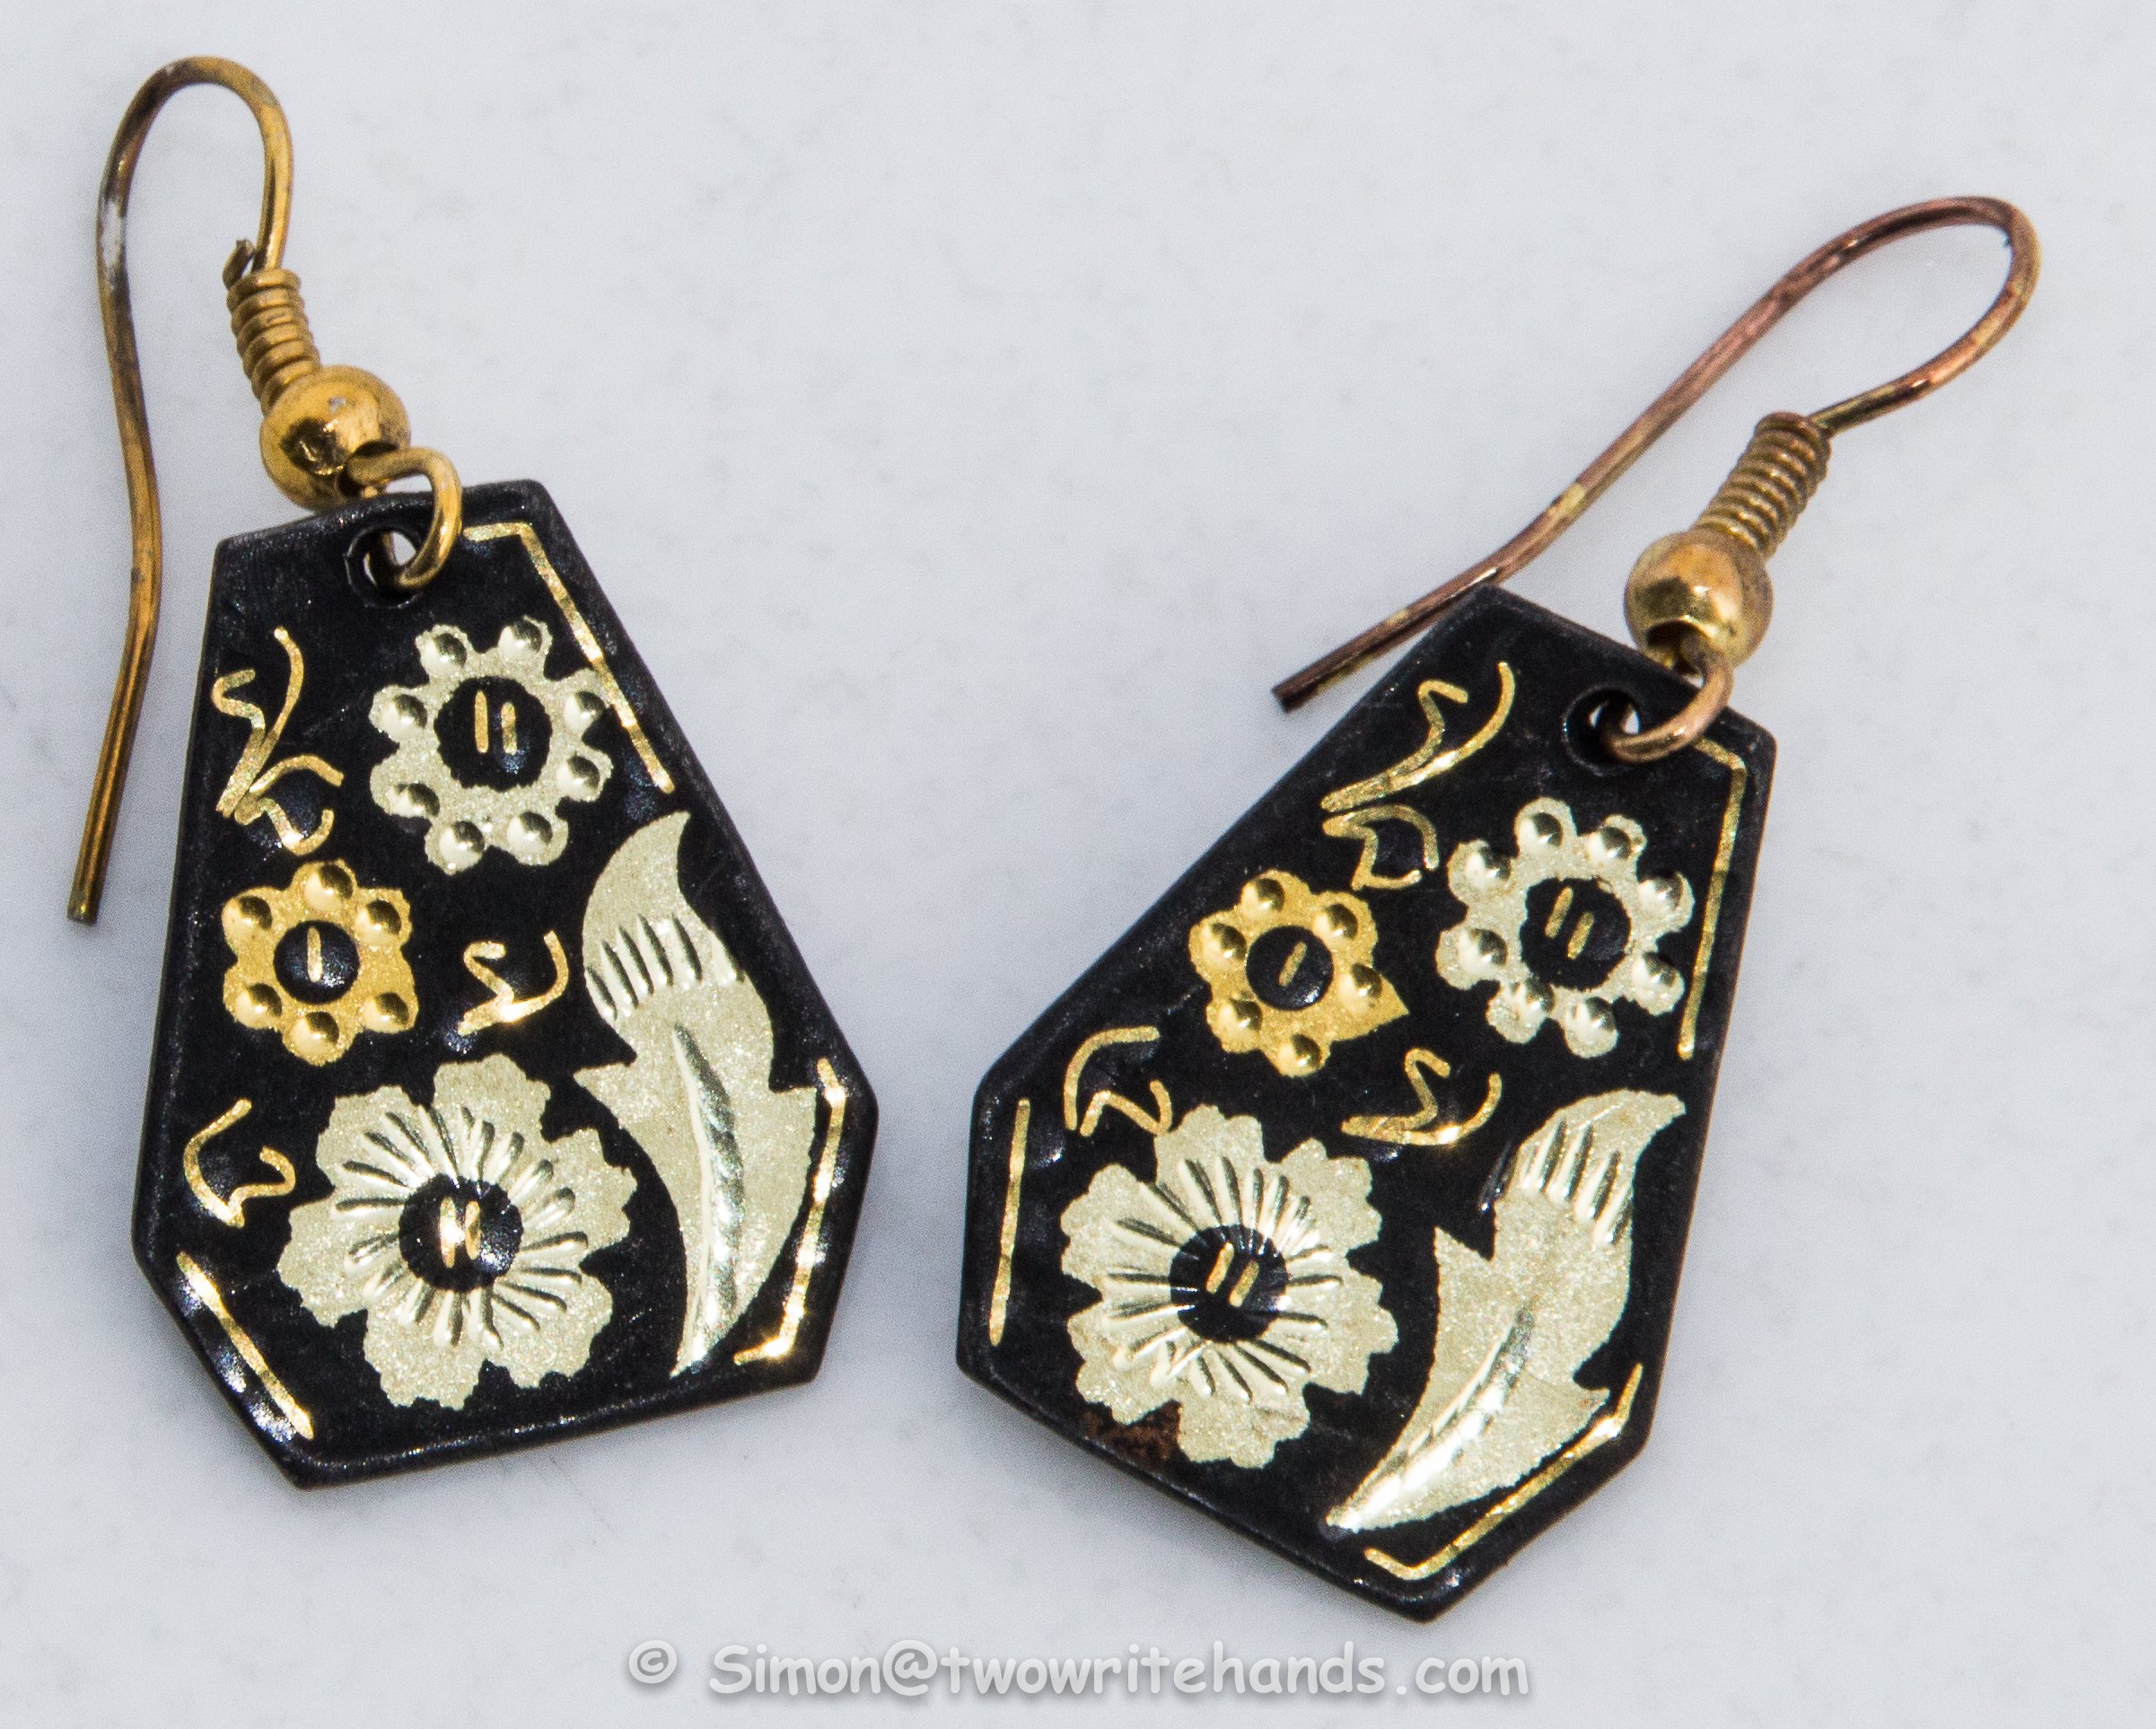 Details about   Lot 87 14 PCS.Toledo Spain 24K Gold Plated Earrings Pins Damascene Style Jewelry 